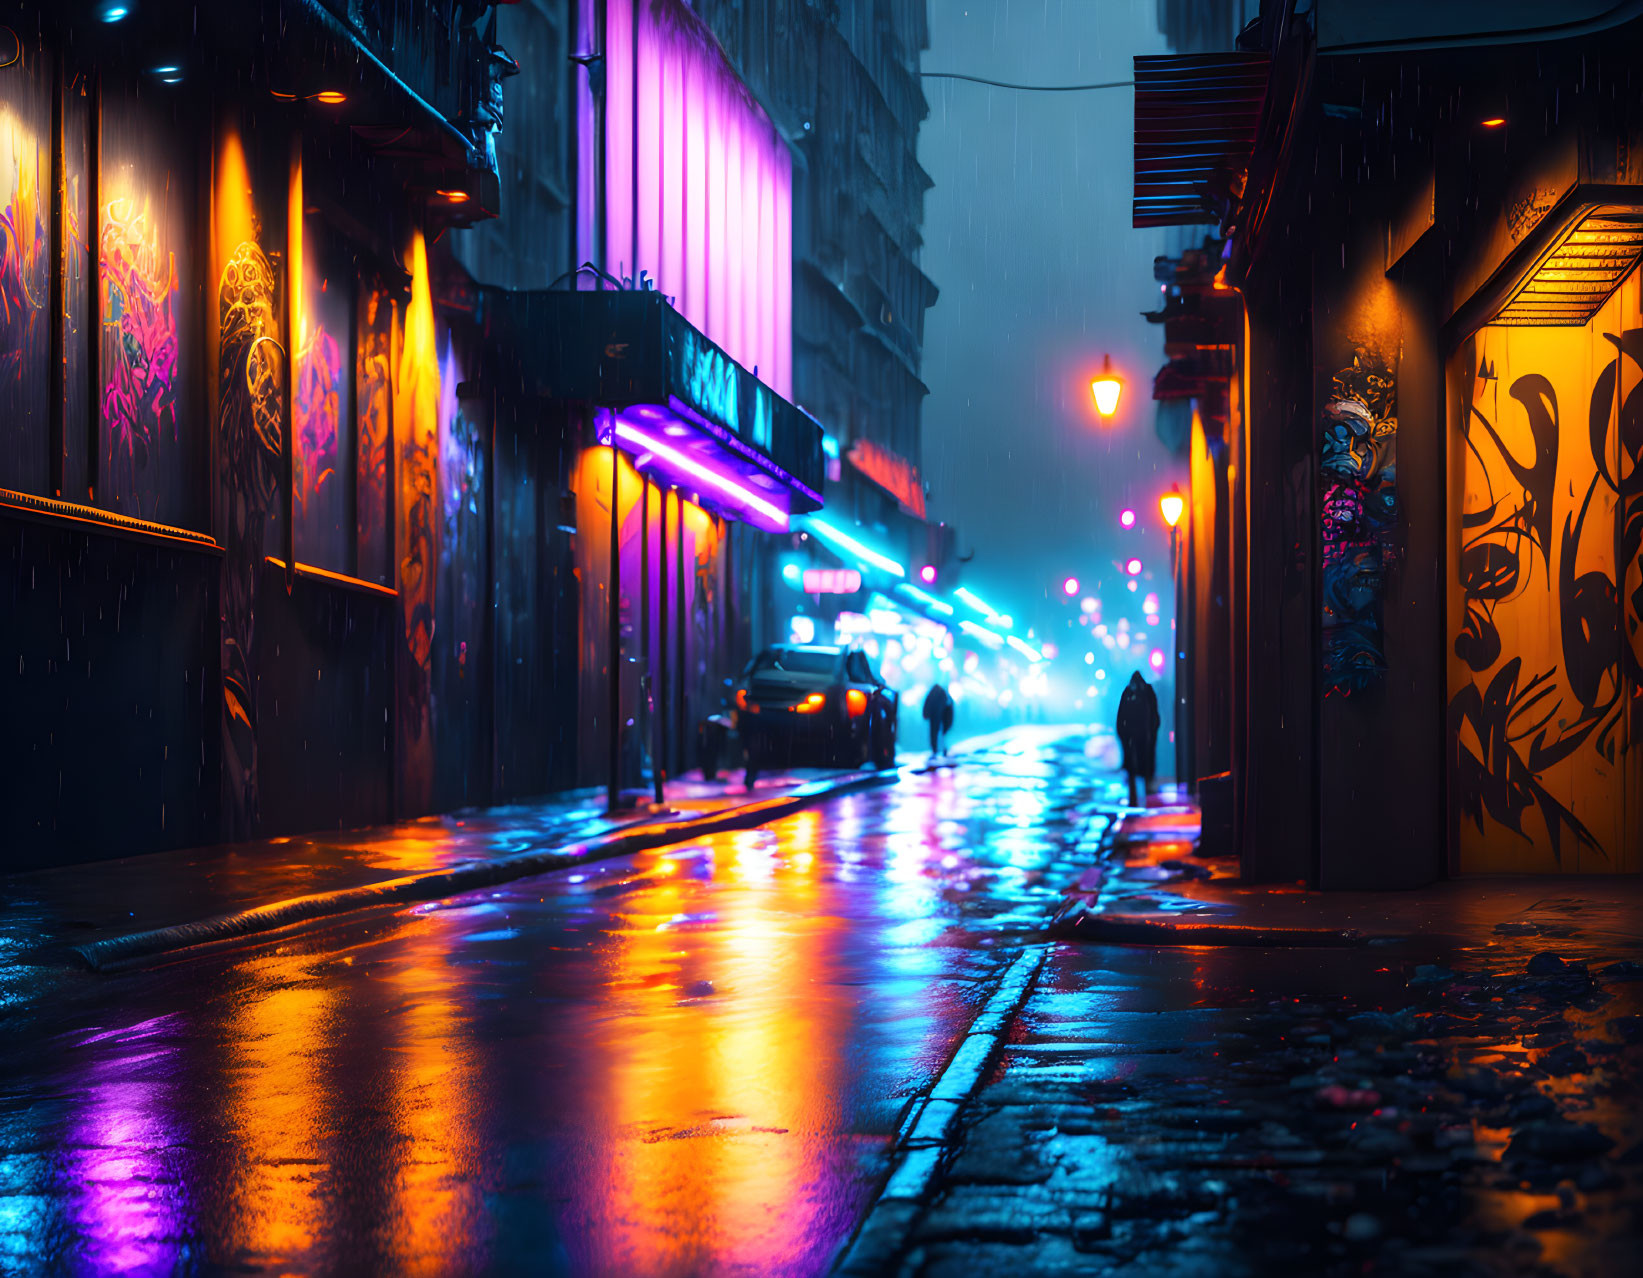 Rainy city street at night: Neon signs, street lights, reflections, and silhouettes.